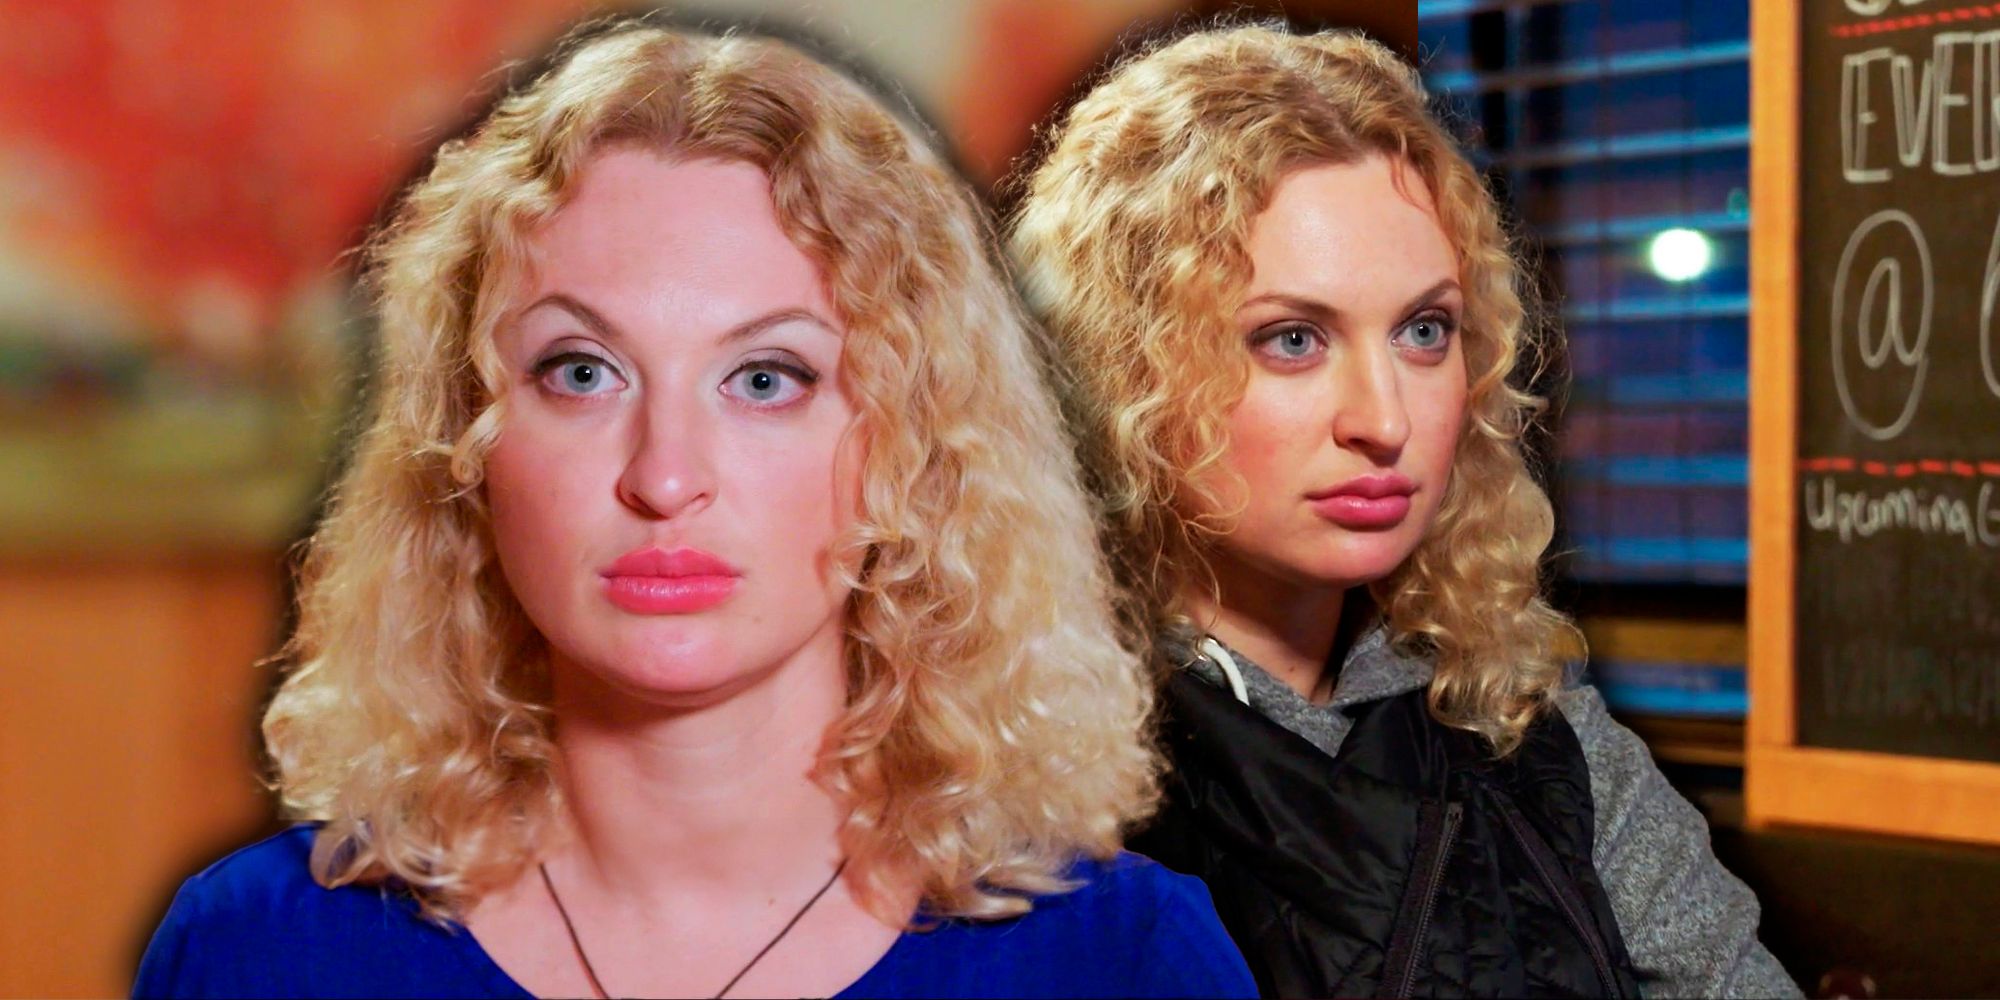 Side by side images of 90 Day Fiance's Natalie Mordovtseva